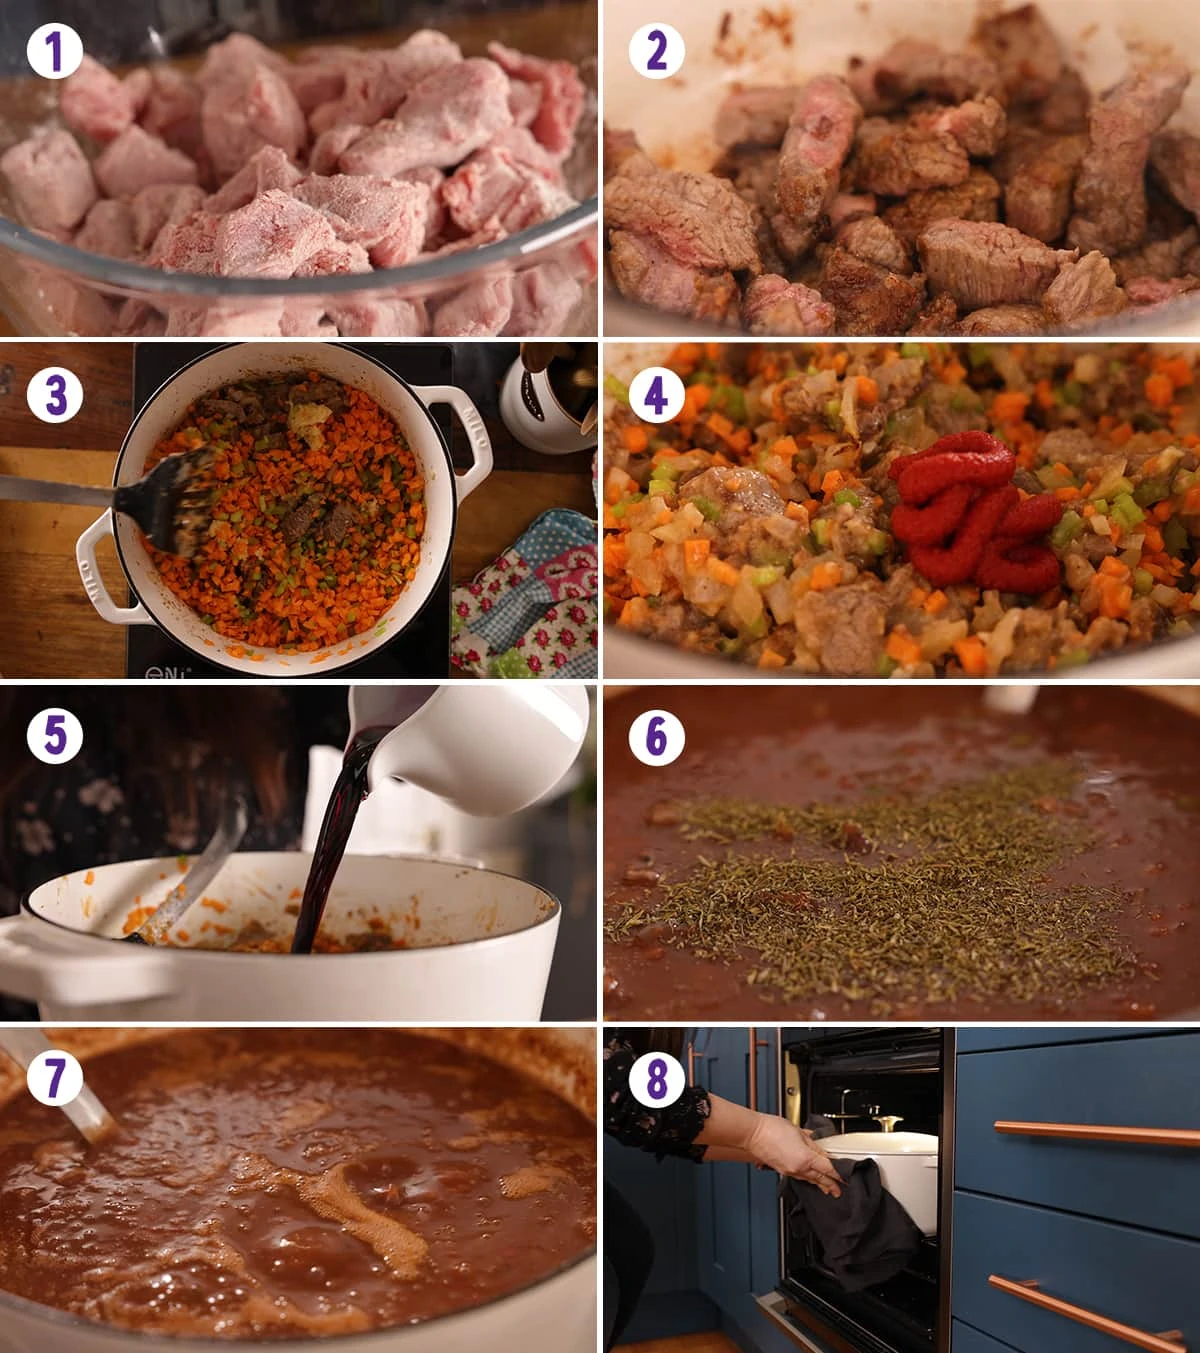 8 image collage showing how to make beef ragu